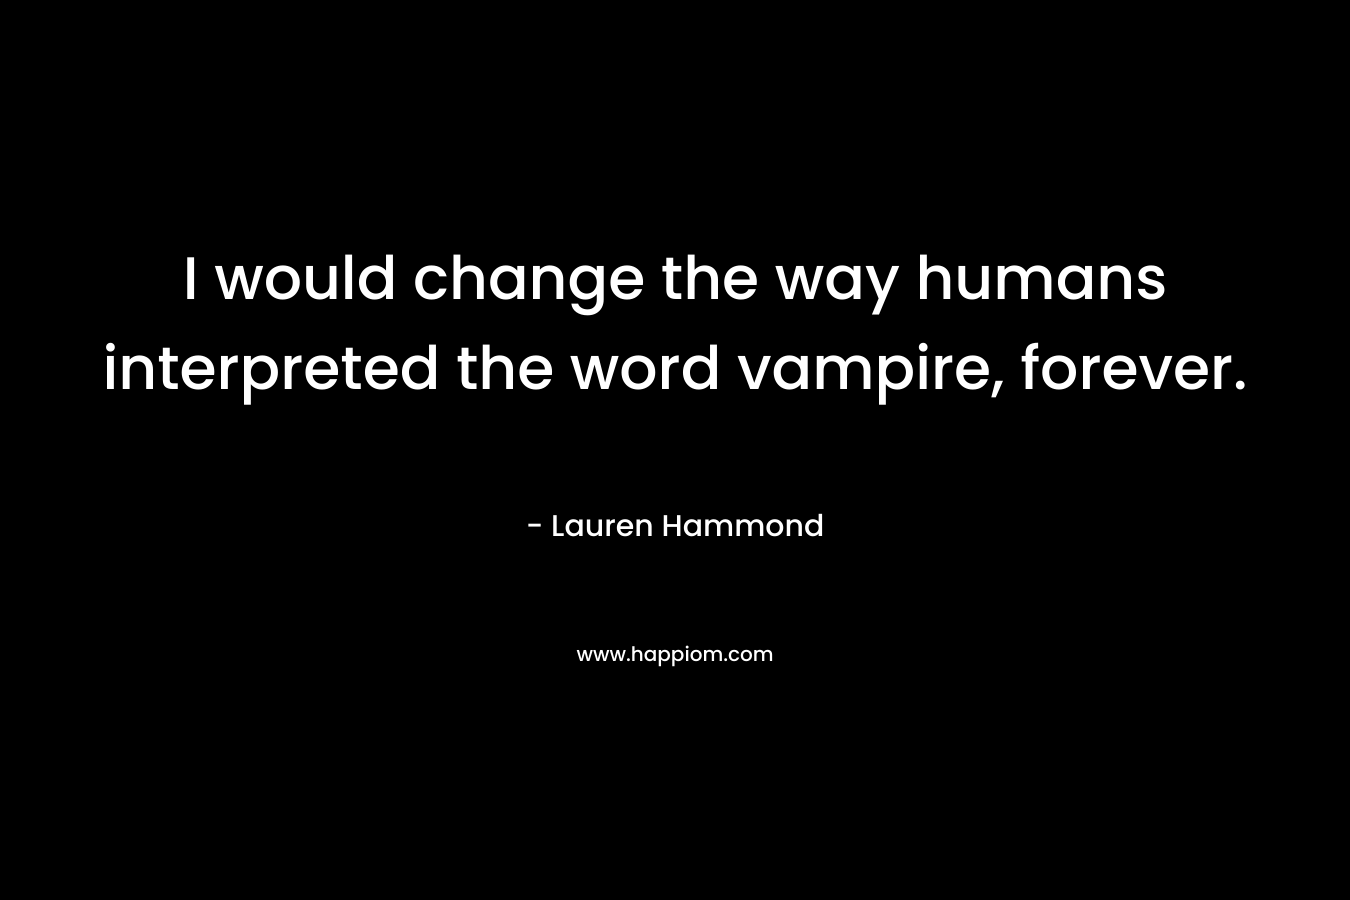 I would change the way humans interpreted the word vampire, forever.